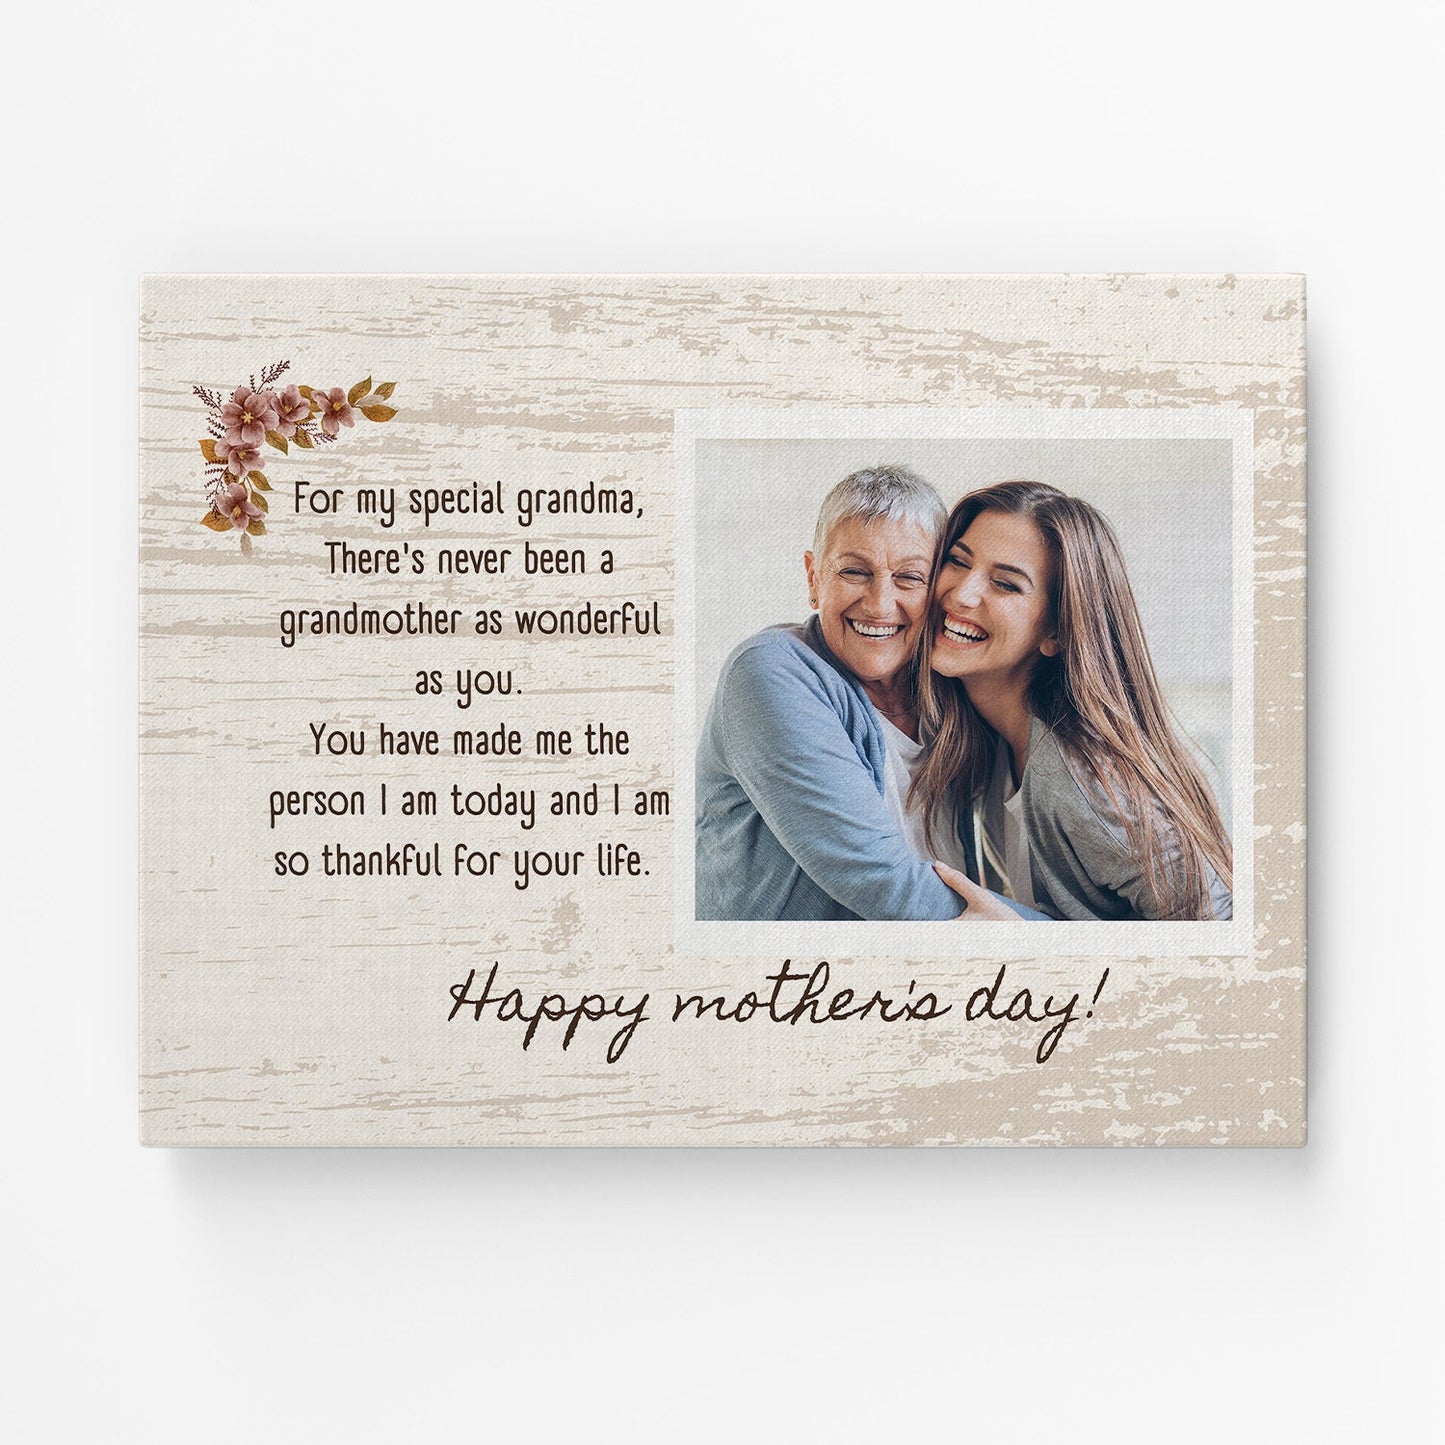 Personalized Mother's Day gift for Grandma - For My Special Grandma - custom Canvas Print - MyMindfulGifts